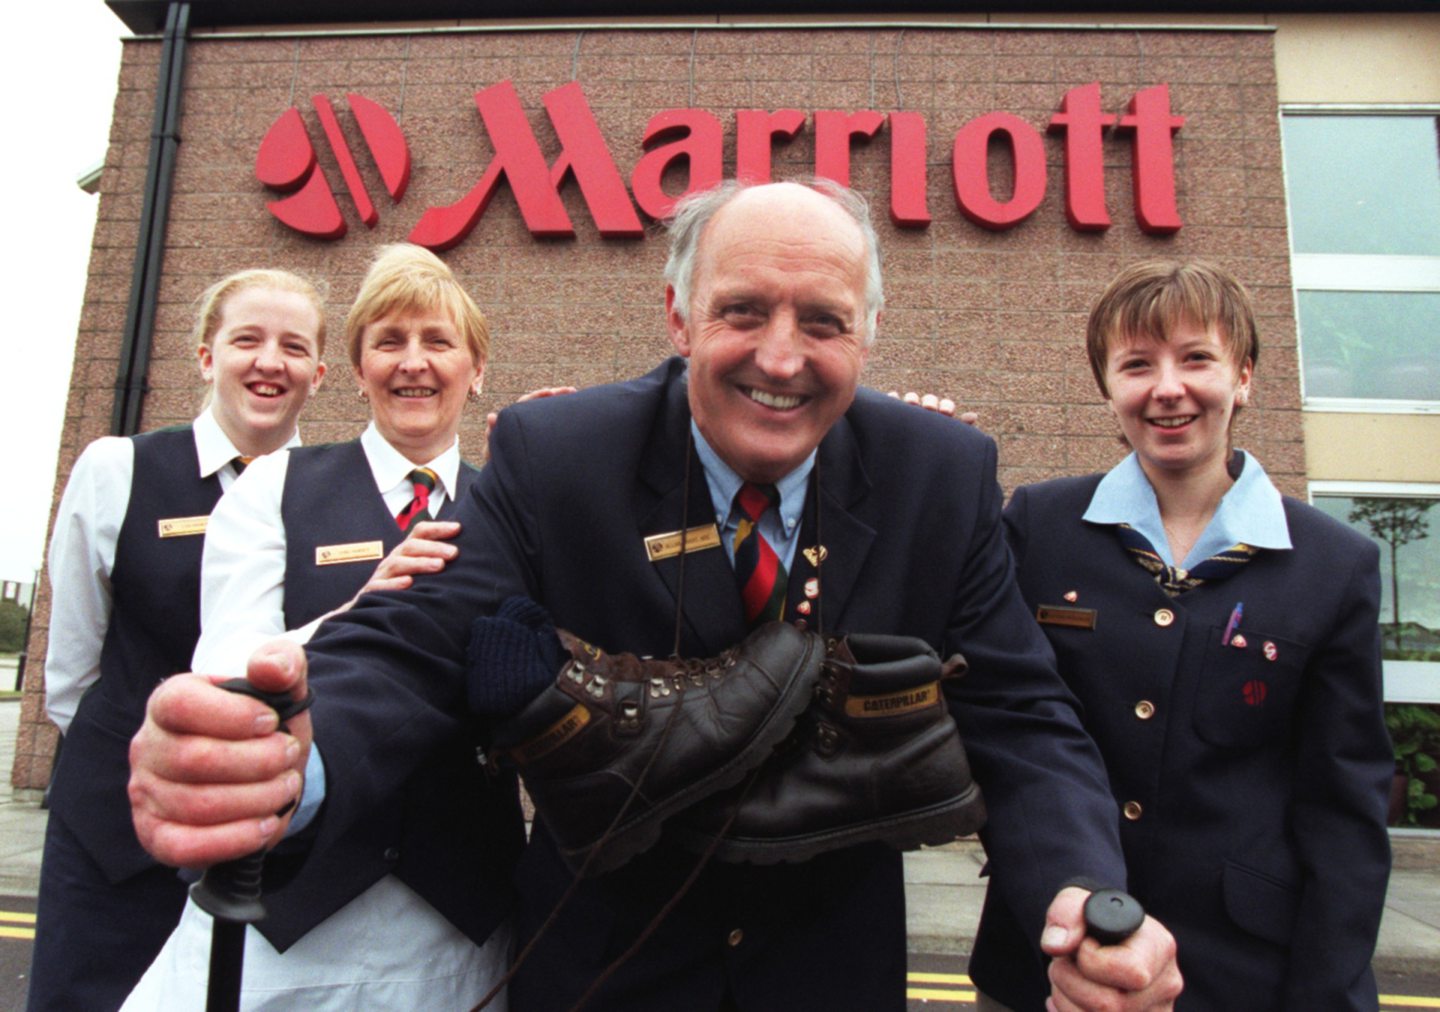 Staff at the Dyce Marriott